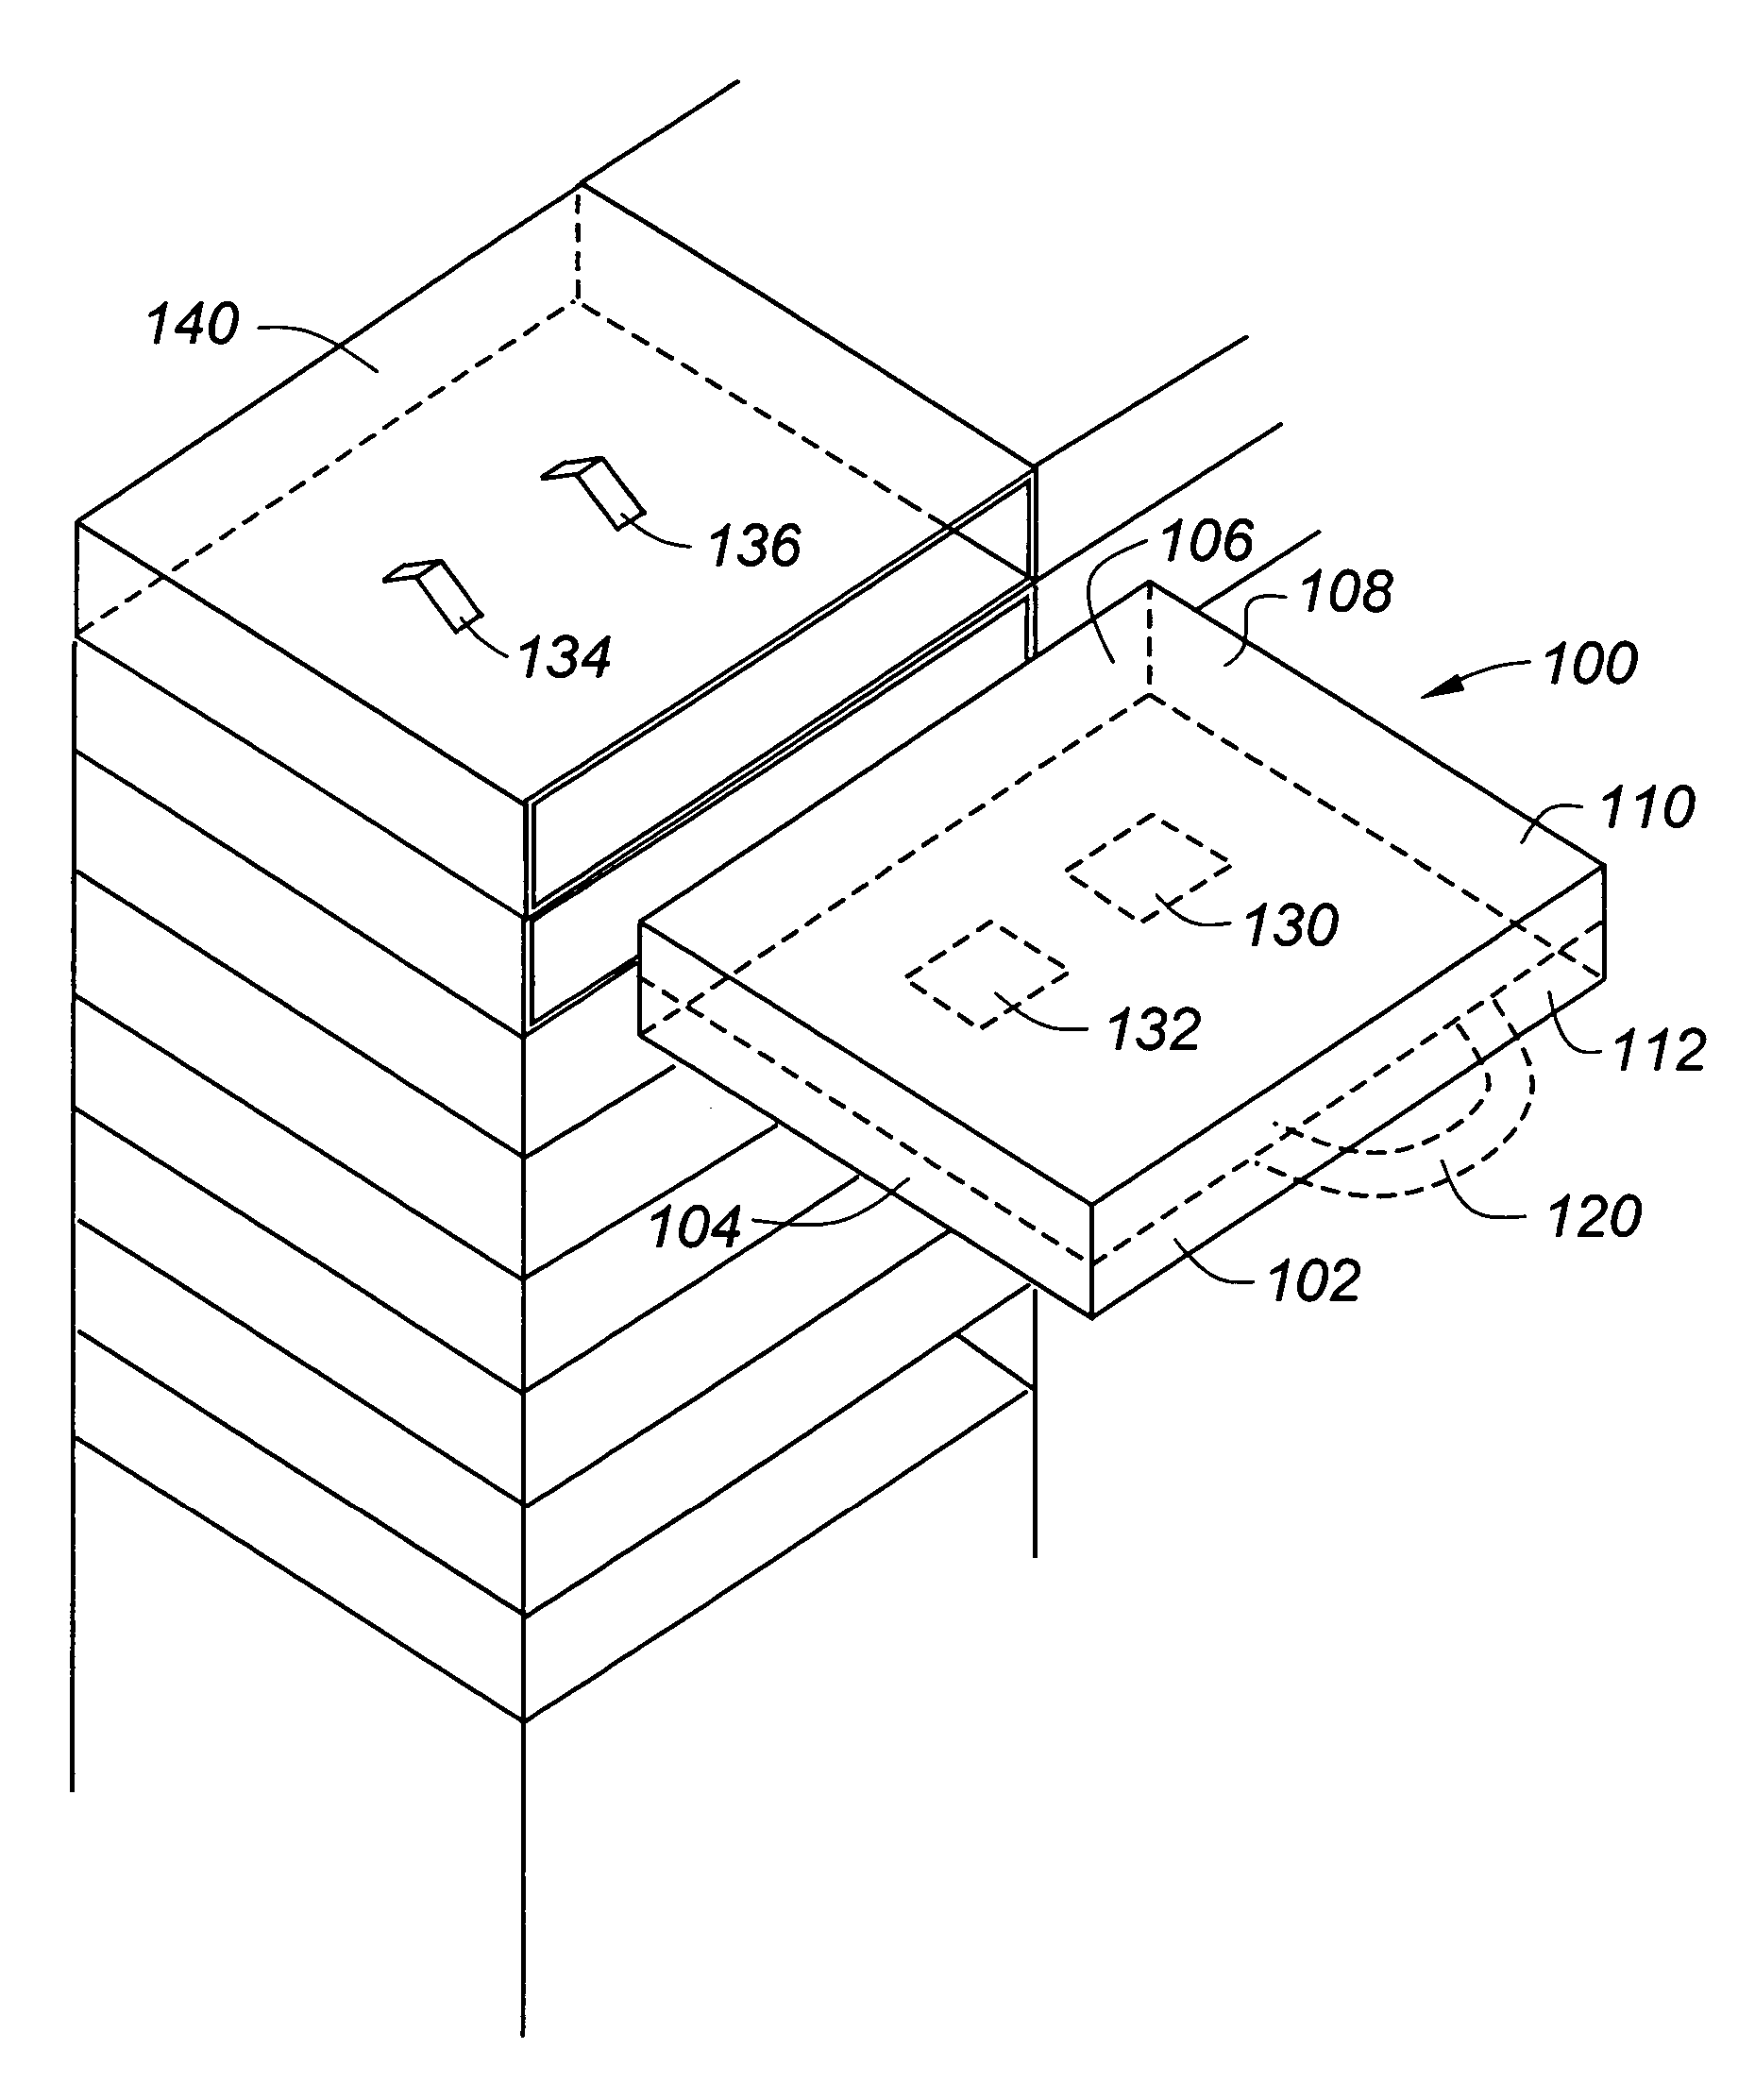 Recharging apparatus for portable electronic devices